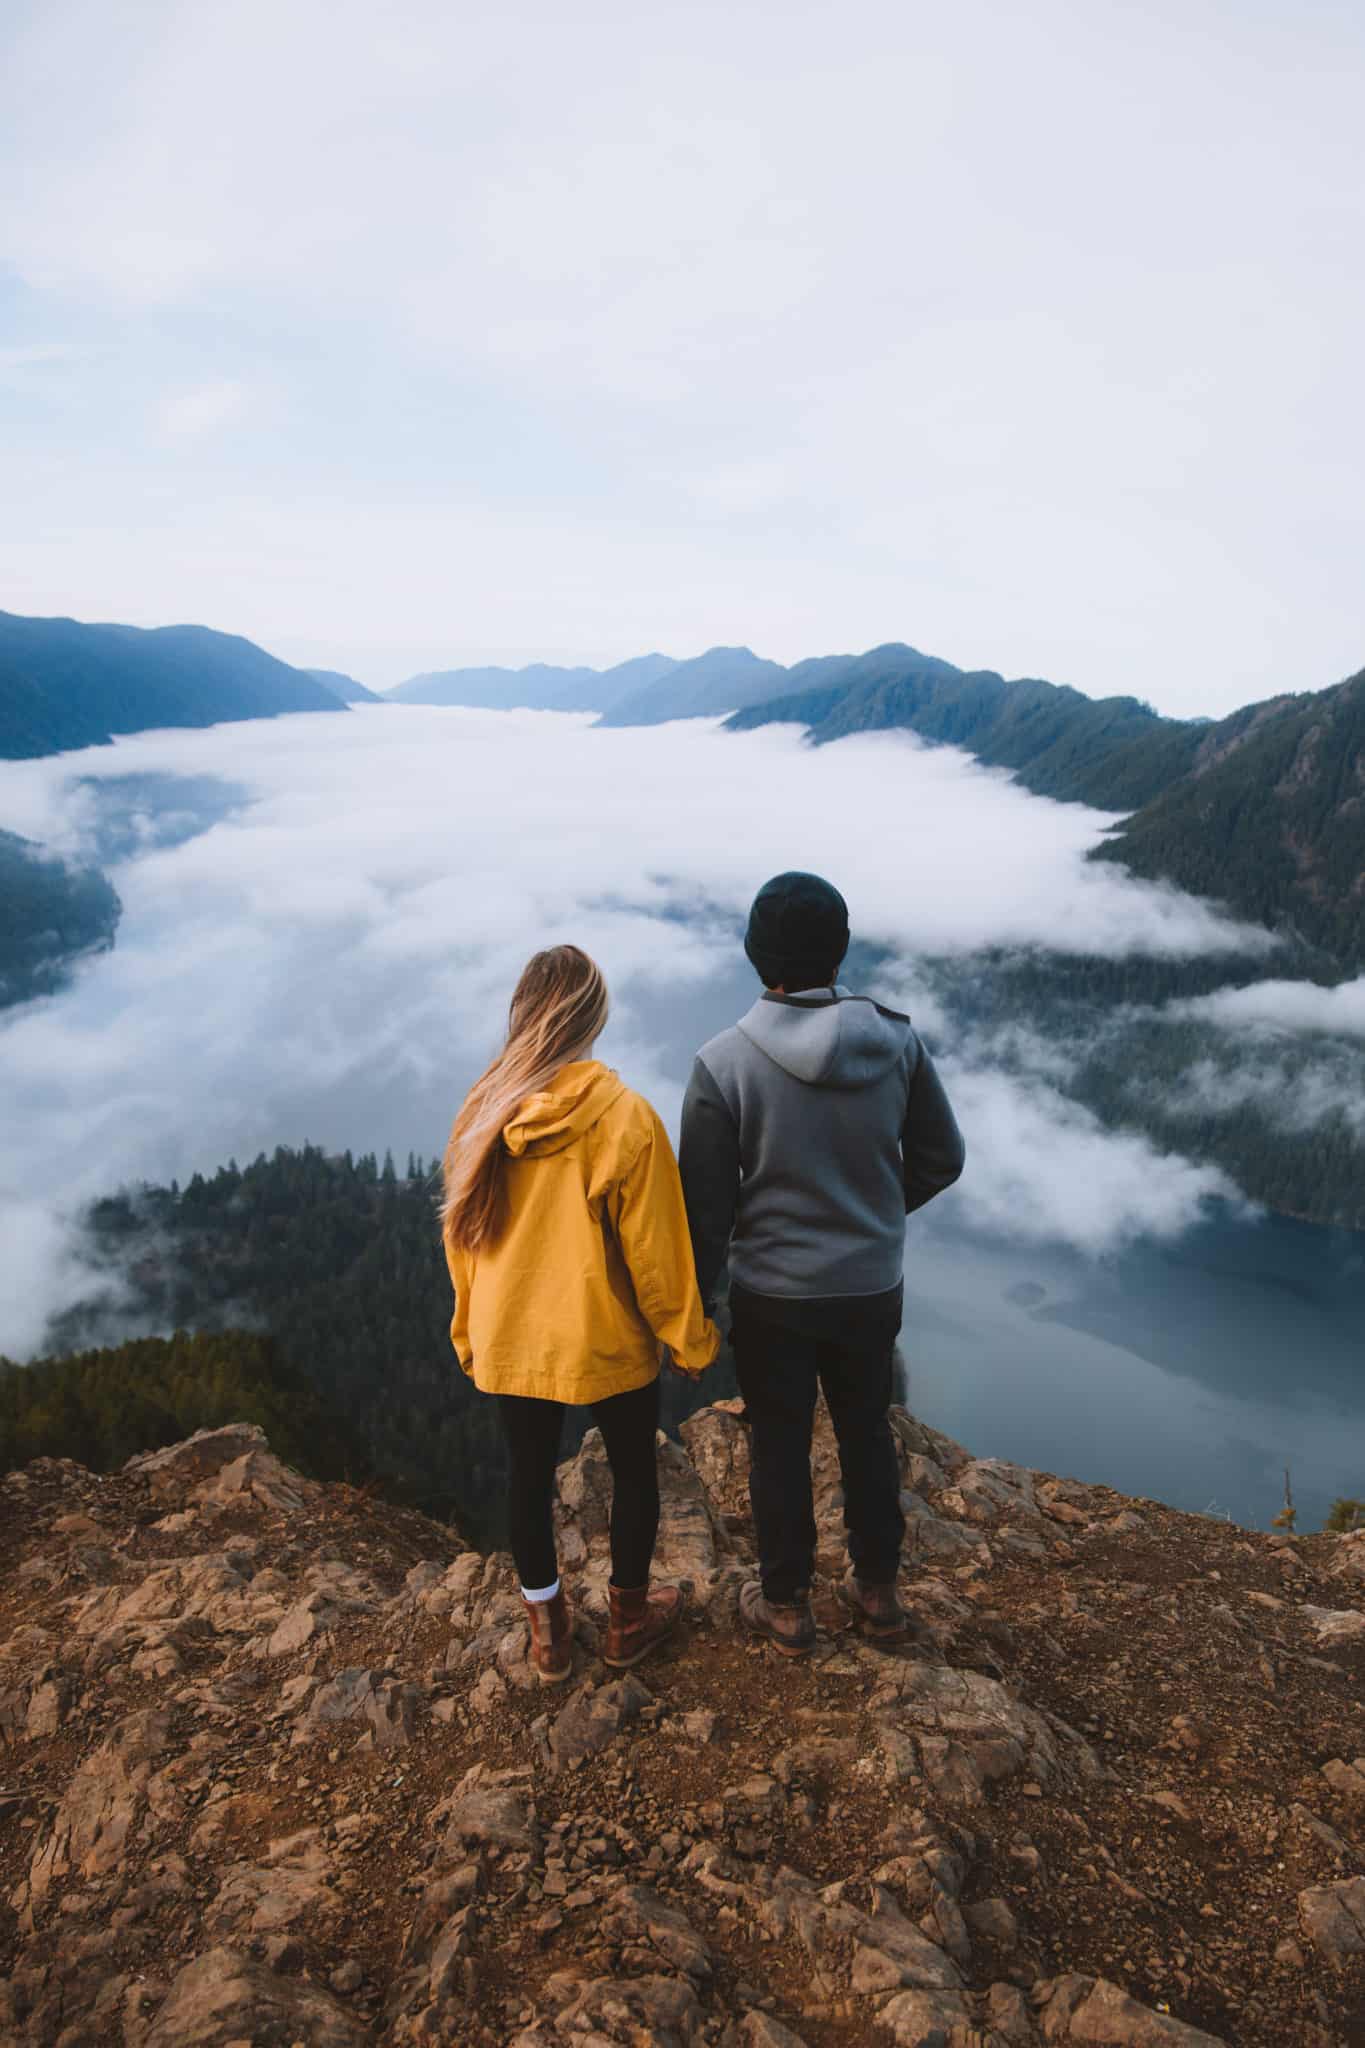 Conquer Mount Storm King with us in this epic adventure post. Located in Washington State on the Olympic Peninsula, this hike is ready to challenge any adventure lover - only the bravest will be rewarded with sweeping views of the valley below!